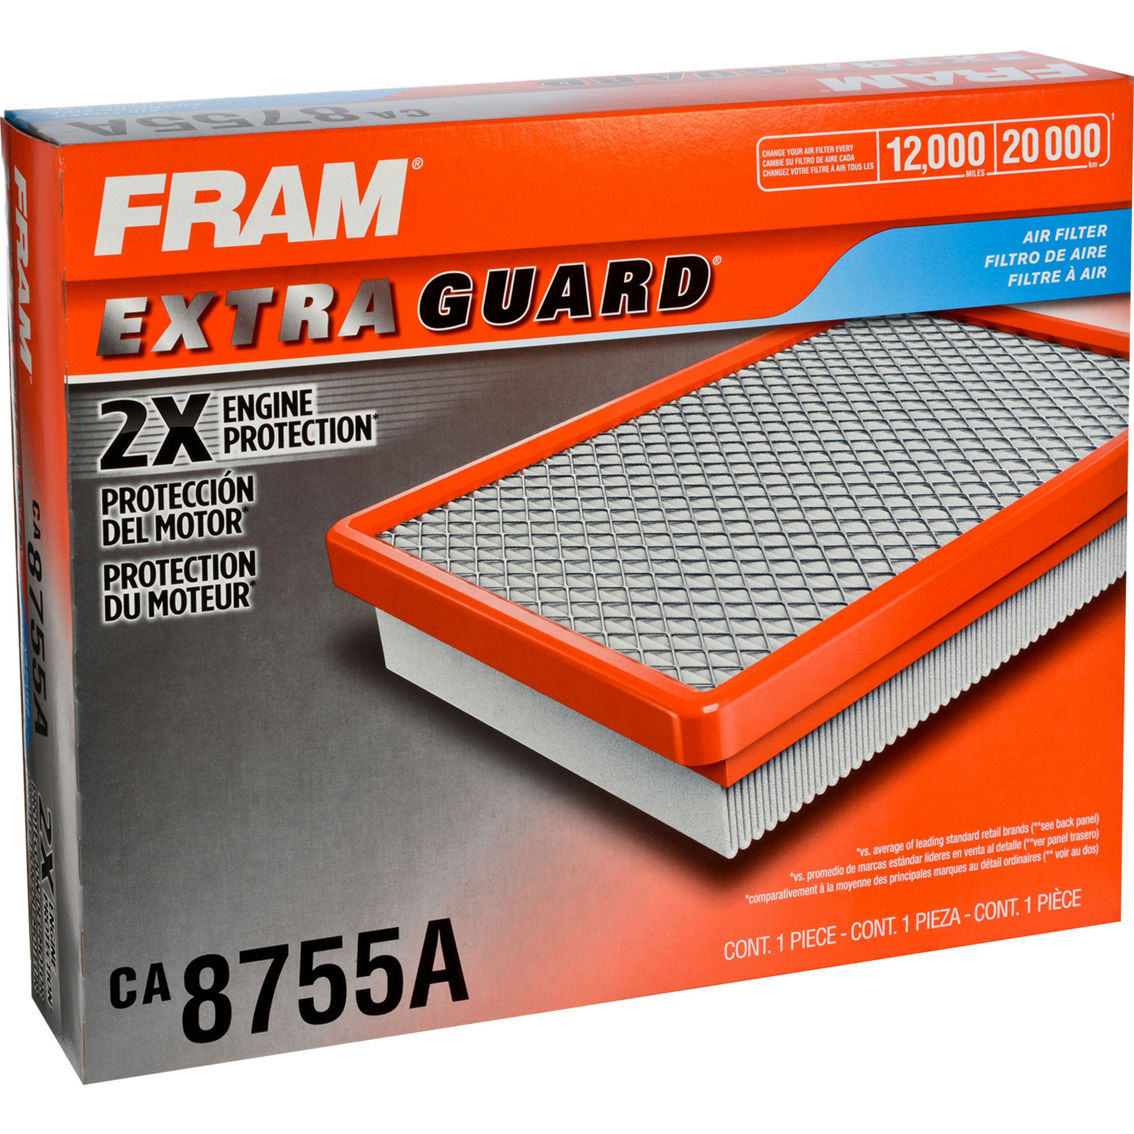 FRAM Extra Guard Flexible Panel Air Filter CA8755A - Image 1 of 4